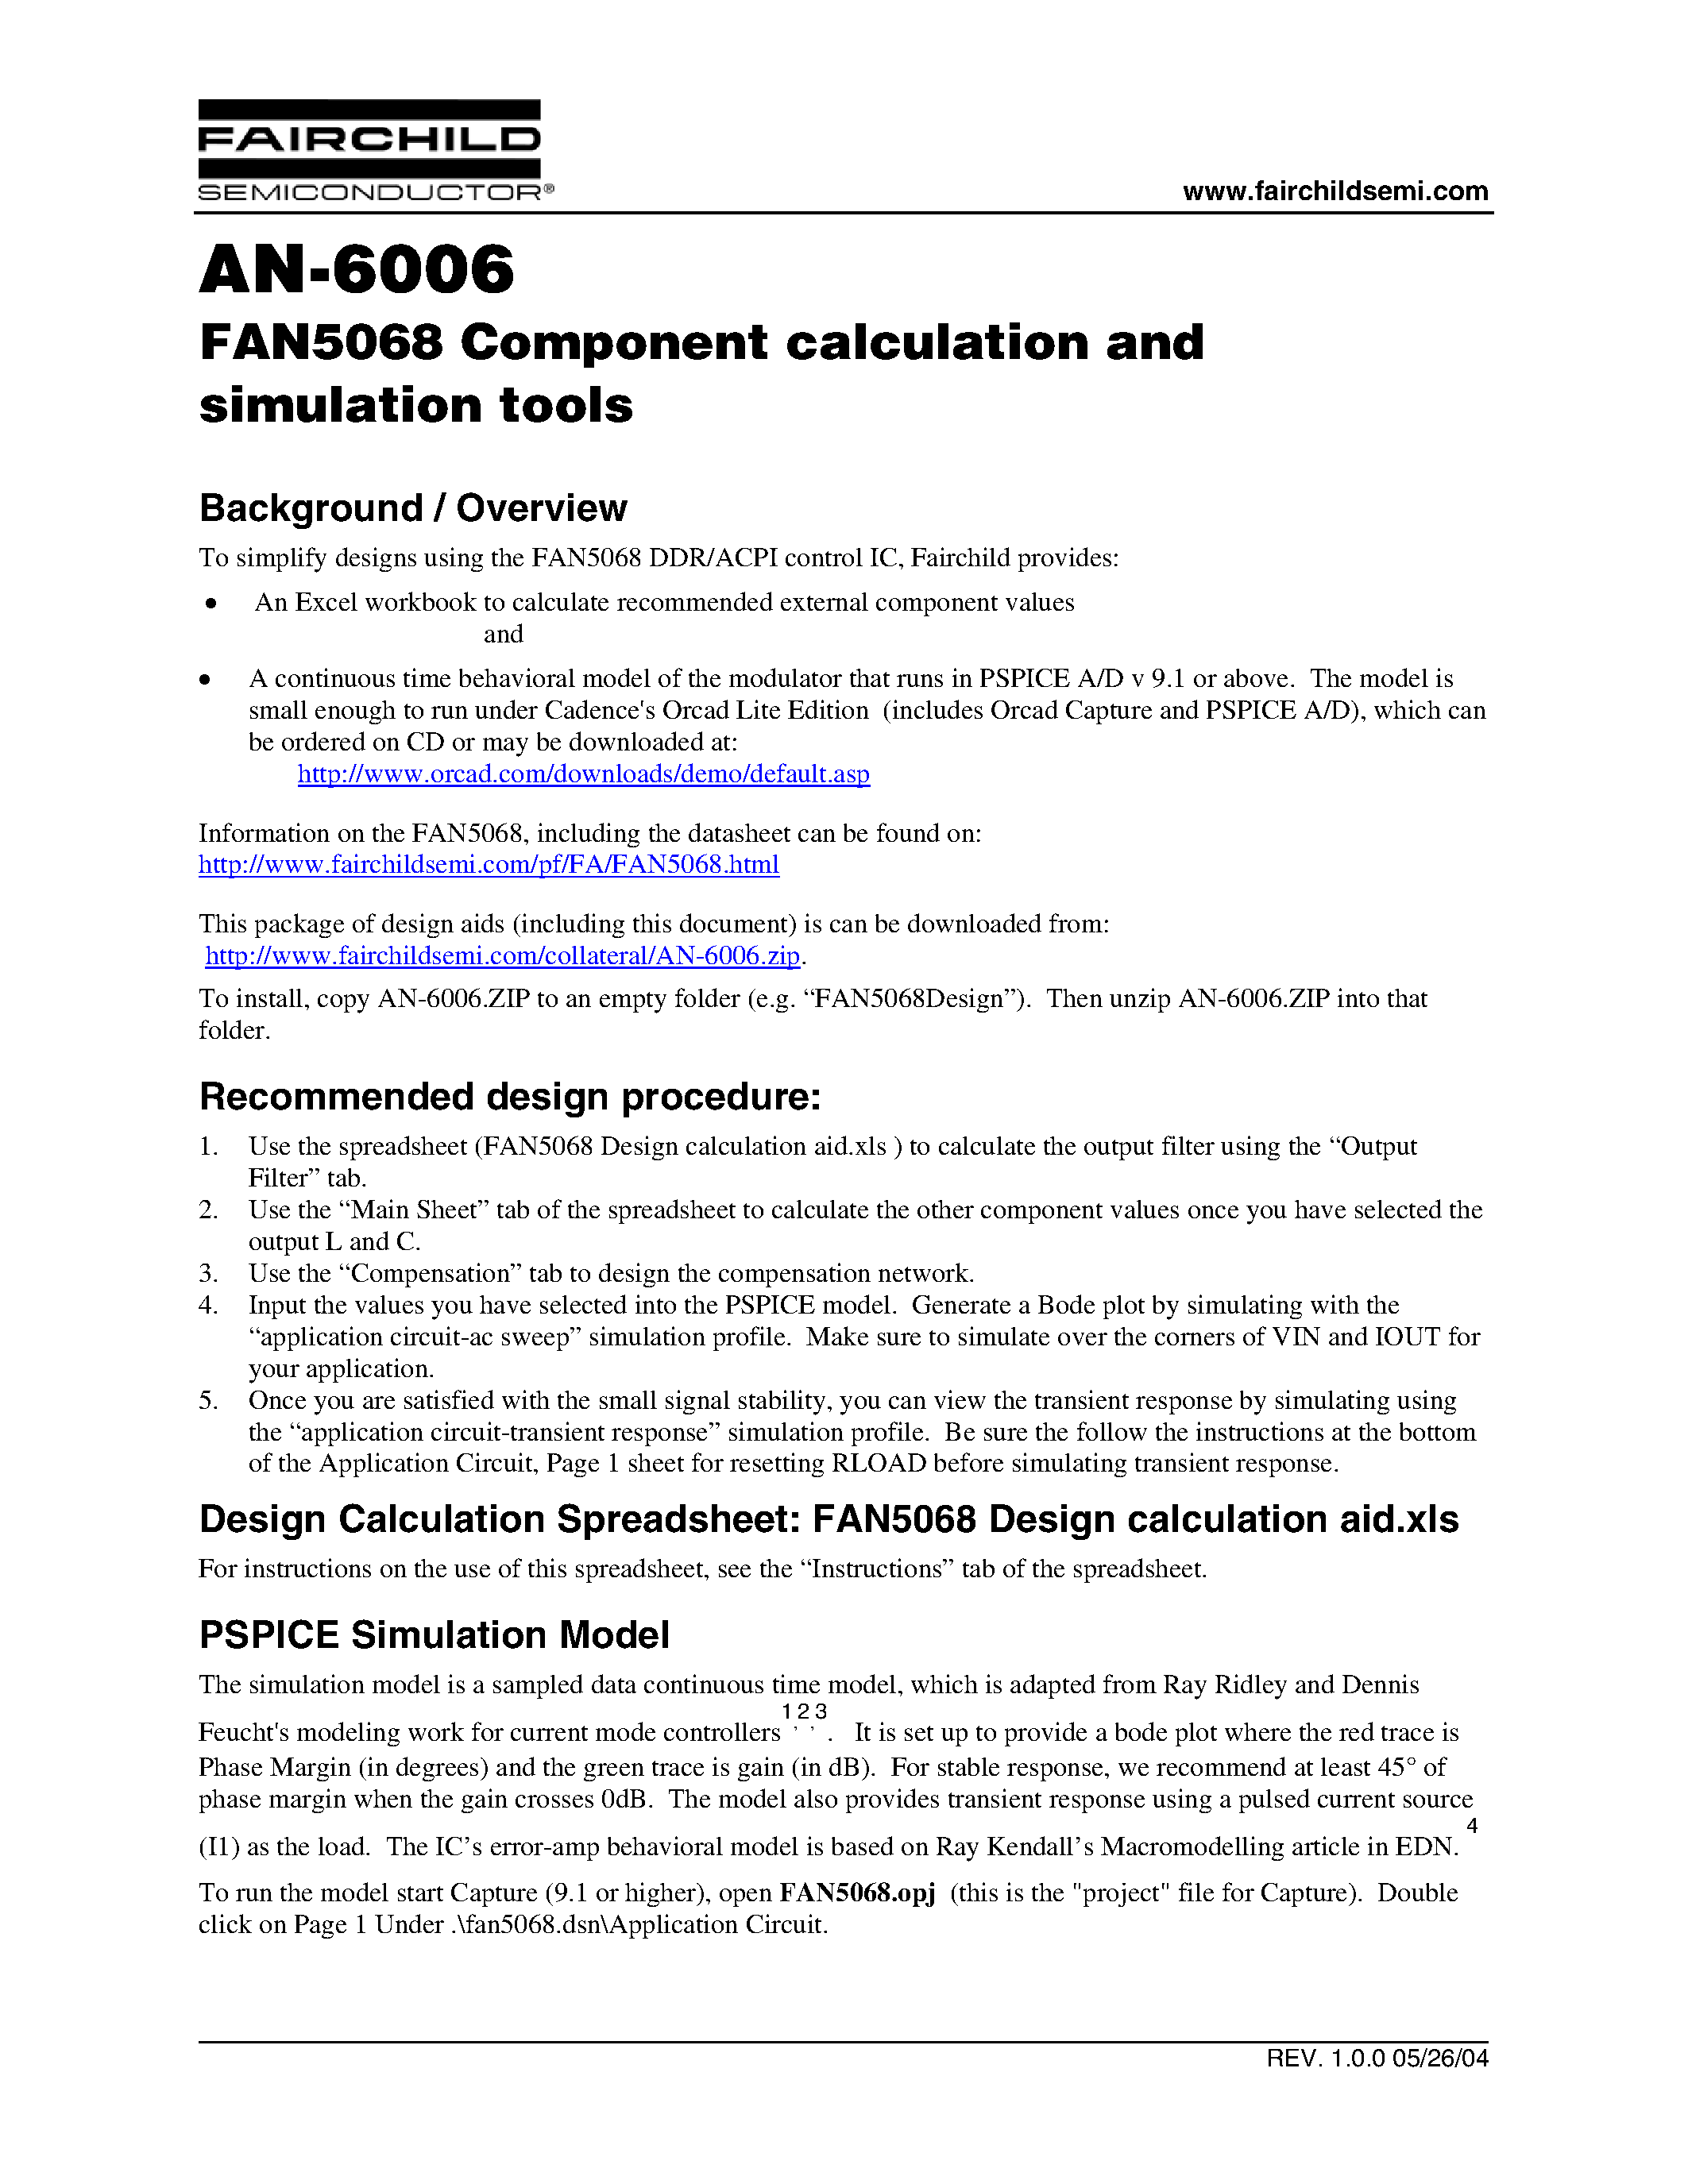 Datasheet FAN5068DDR - FAN5068 Component calculation and simulation tools page 1